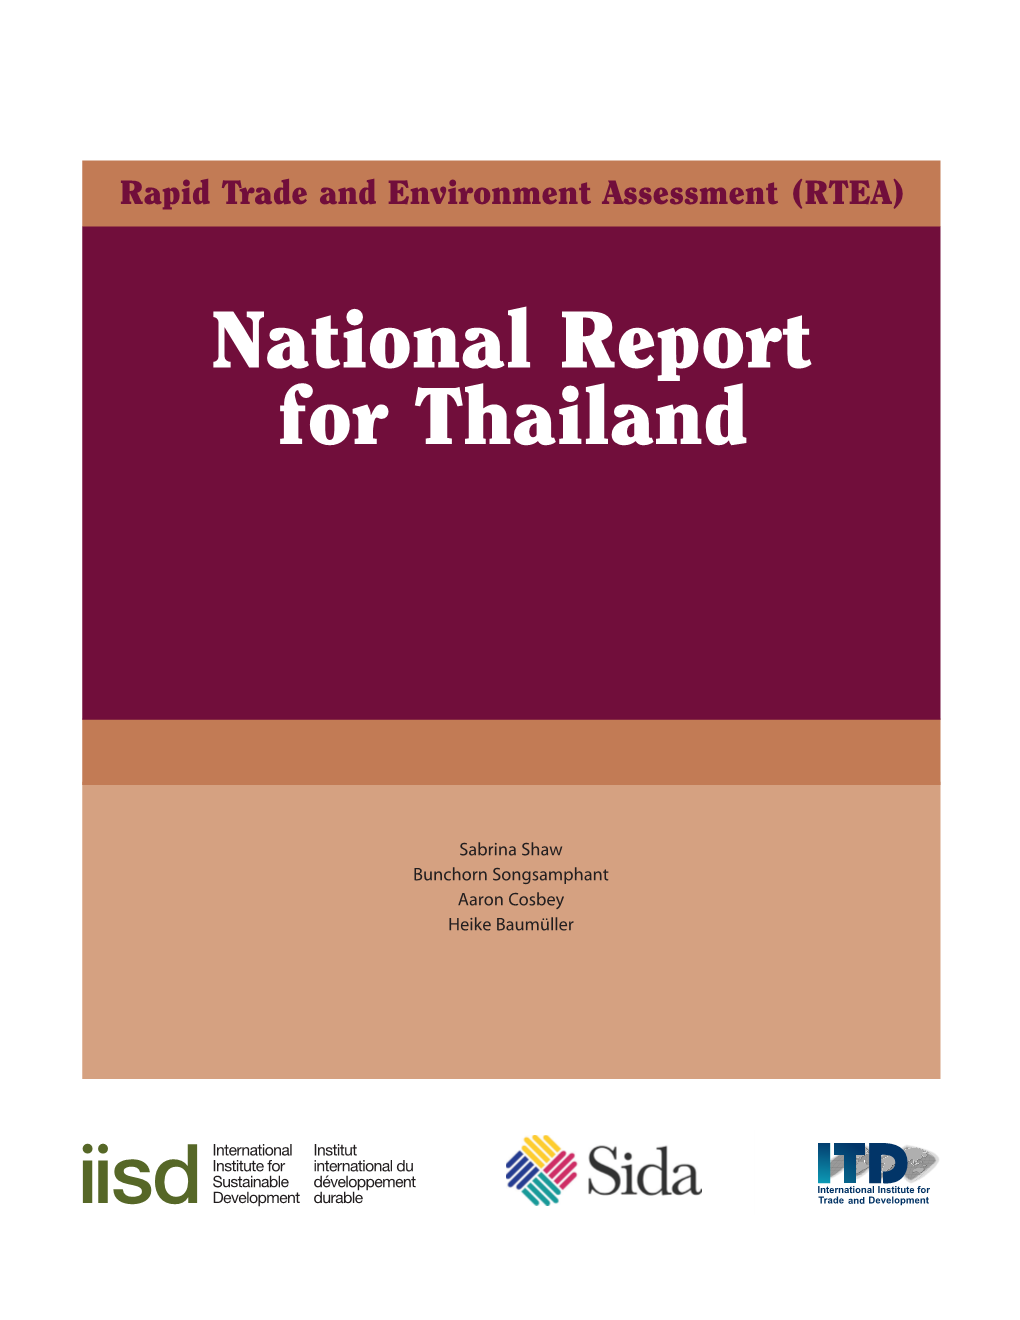 Rapid Trade and Environment Assessment (RTEA): National